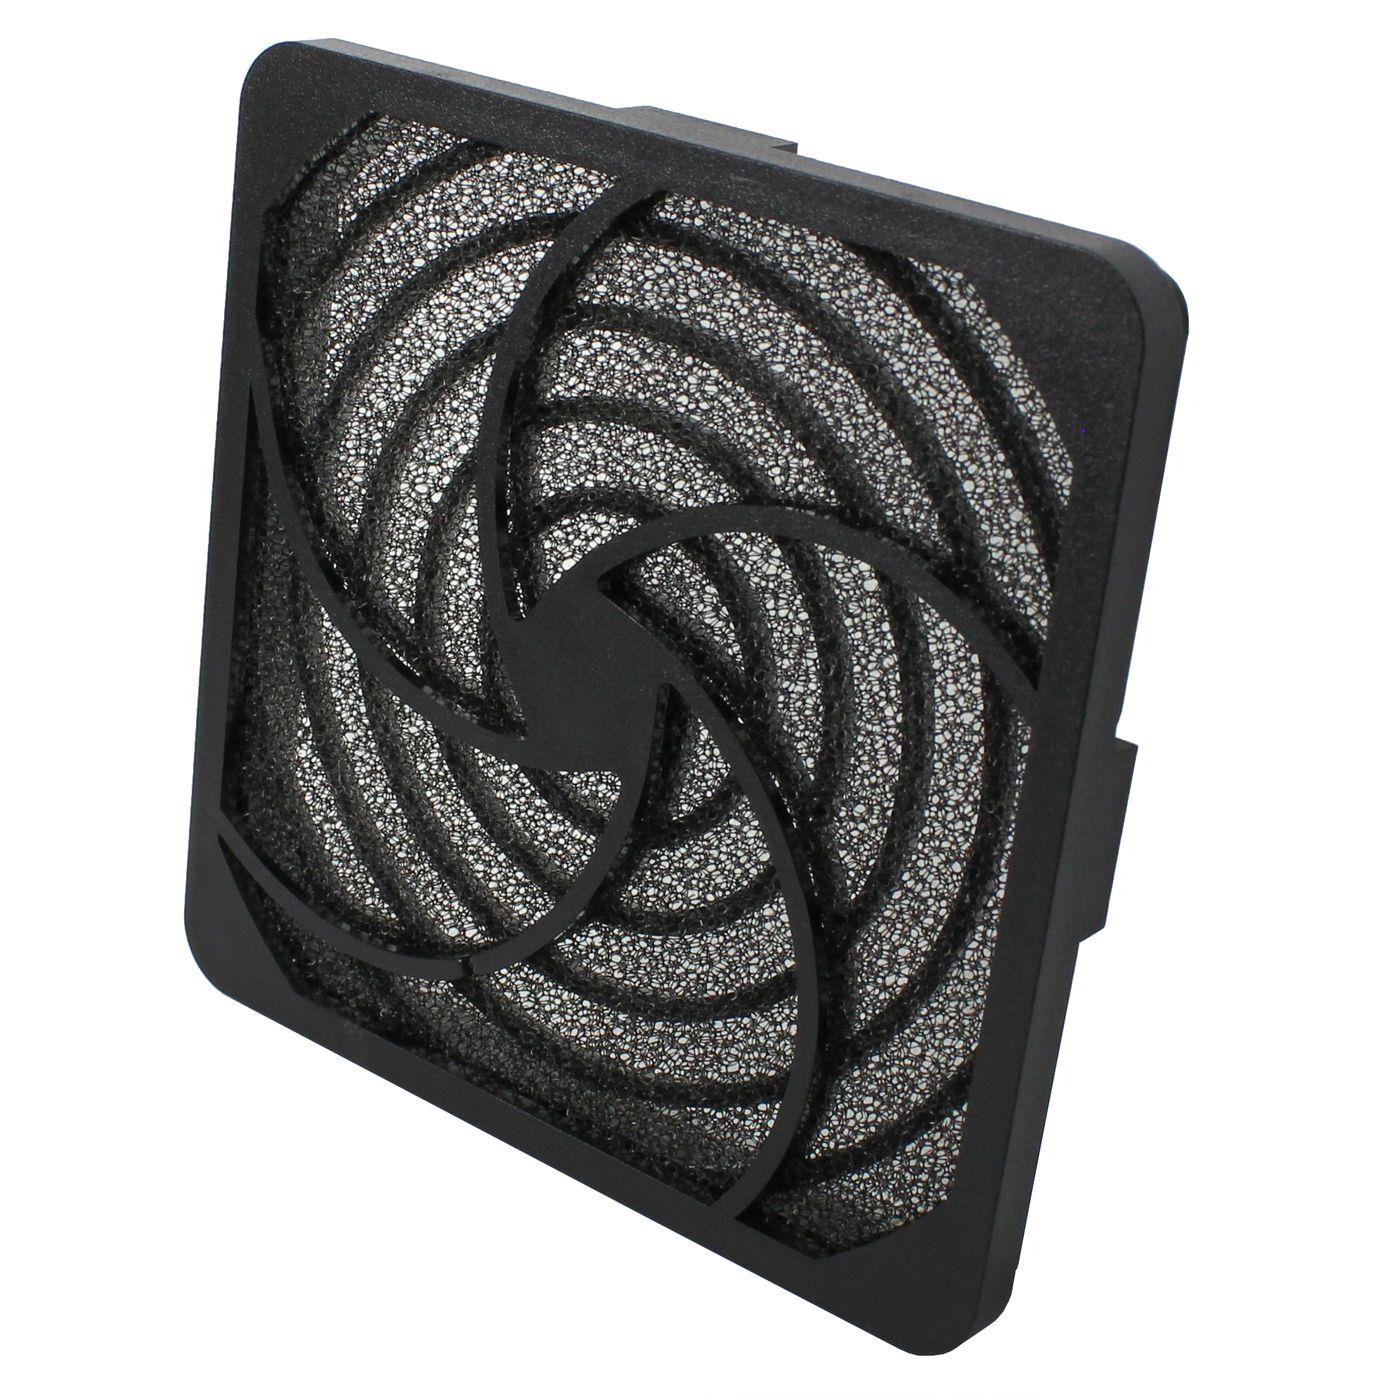 Fan grille + Dust filter 92x92mm 30ppi 3-part spin-on filter